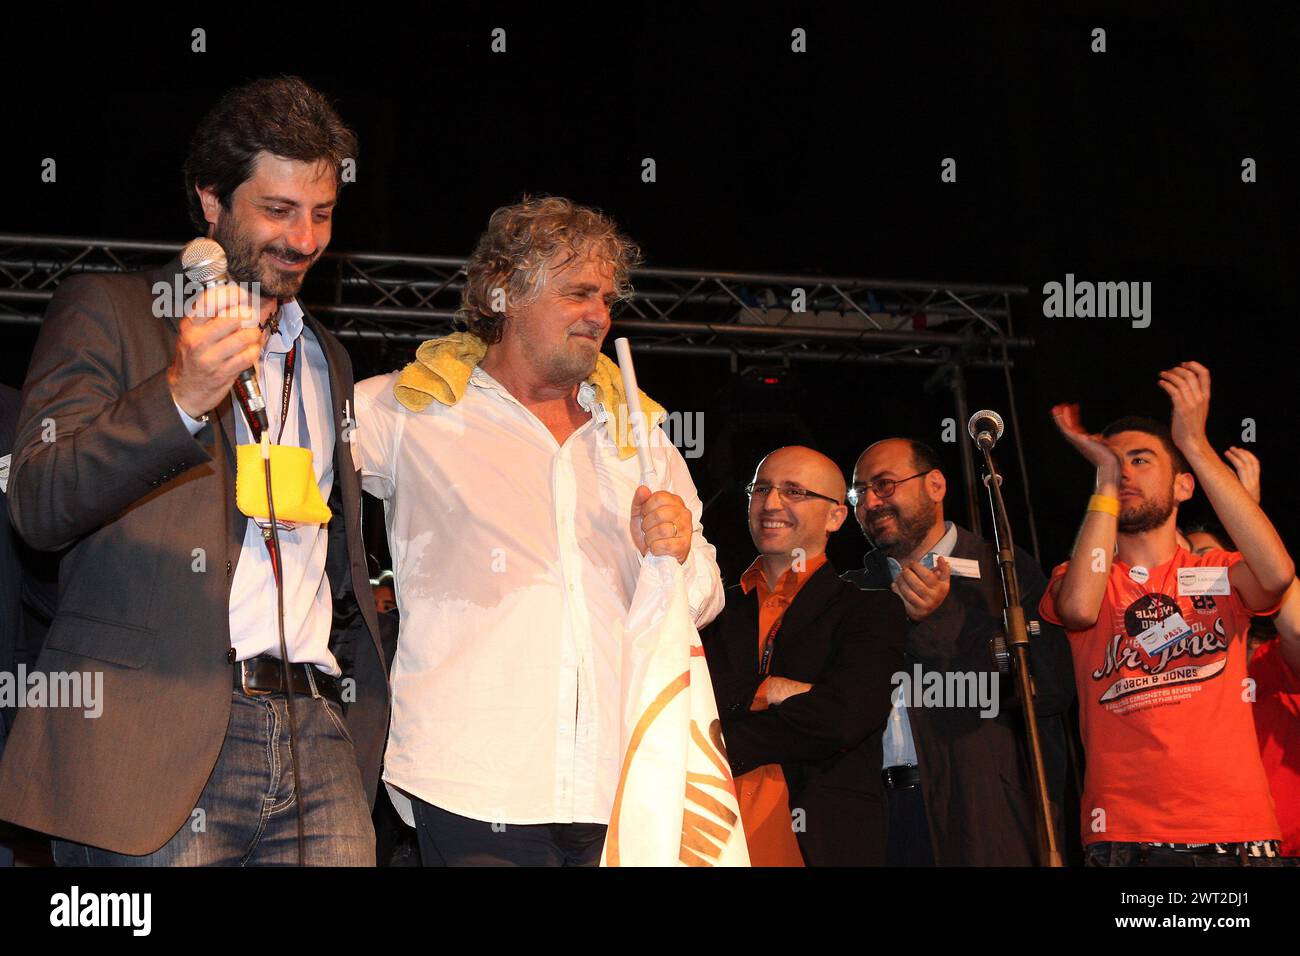 Roberto Fico and Beppe Grillo, leaders of the italian political Movement 5 Stars, during a meeting in Naples Stock Photo